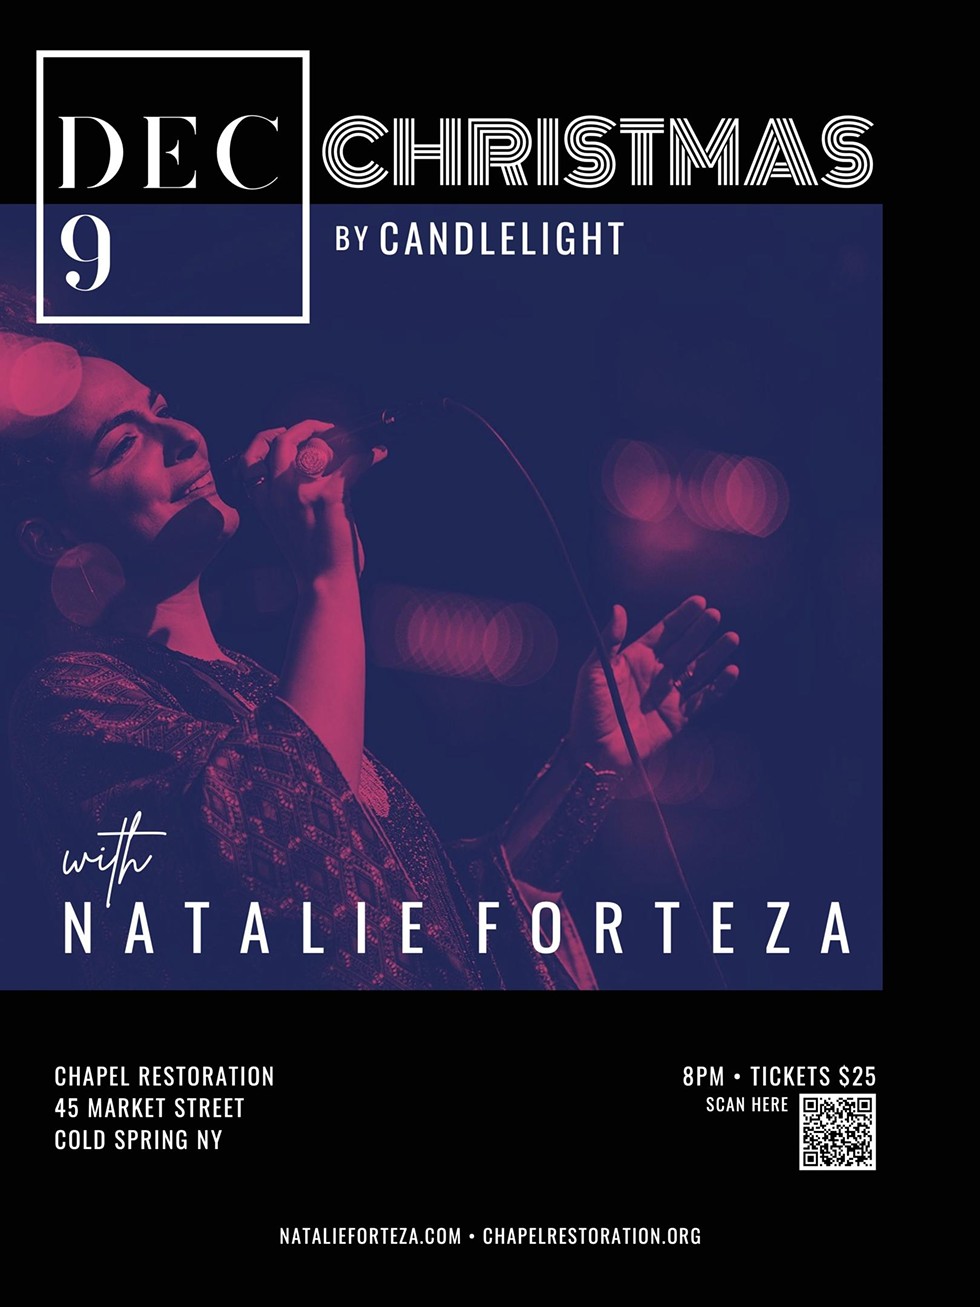 Dec 9 / Christmas by Candlelight with Natalie Forteza